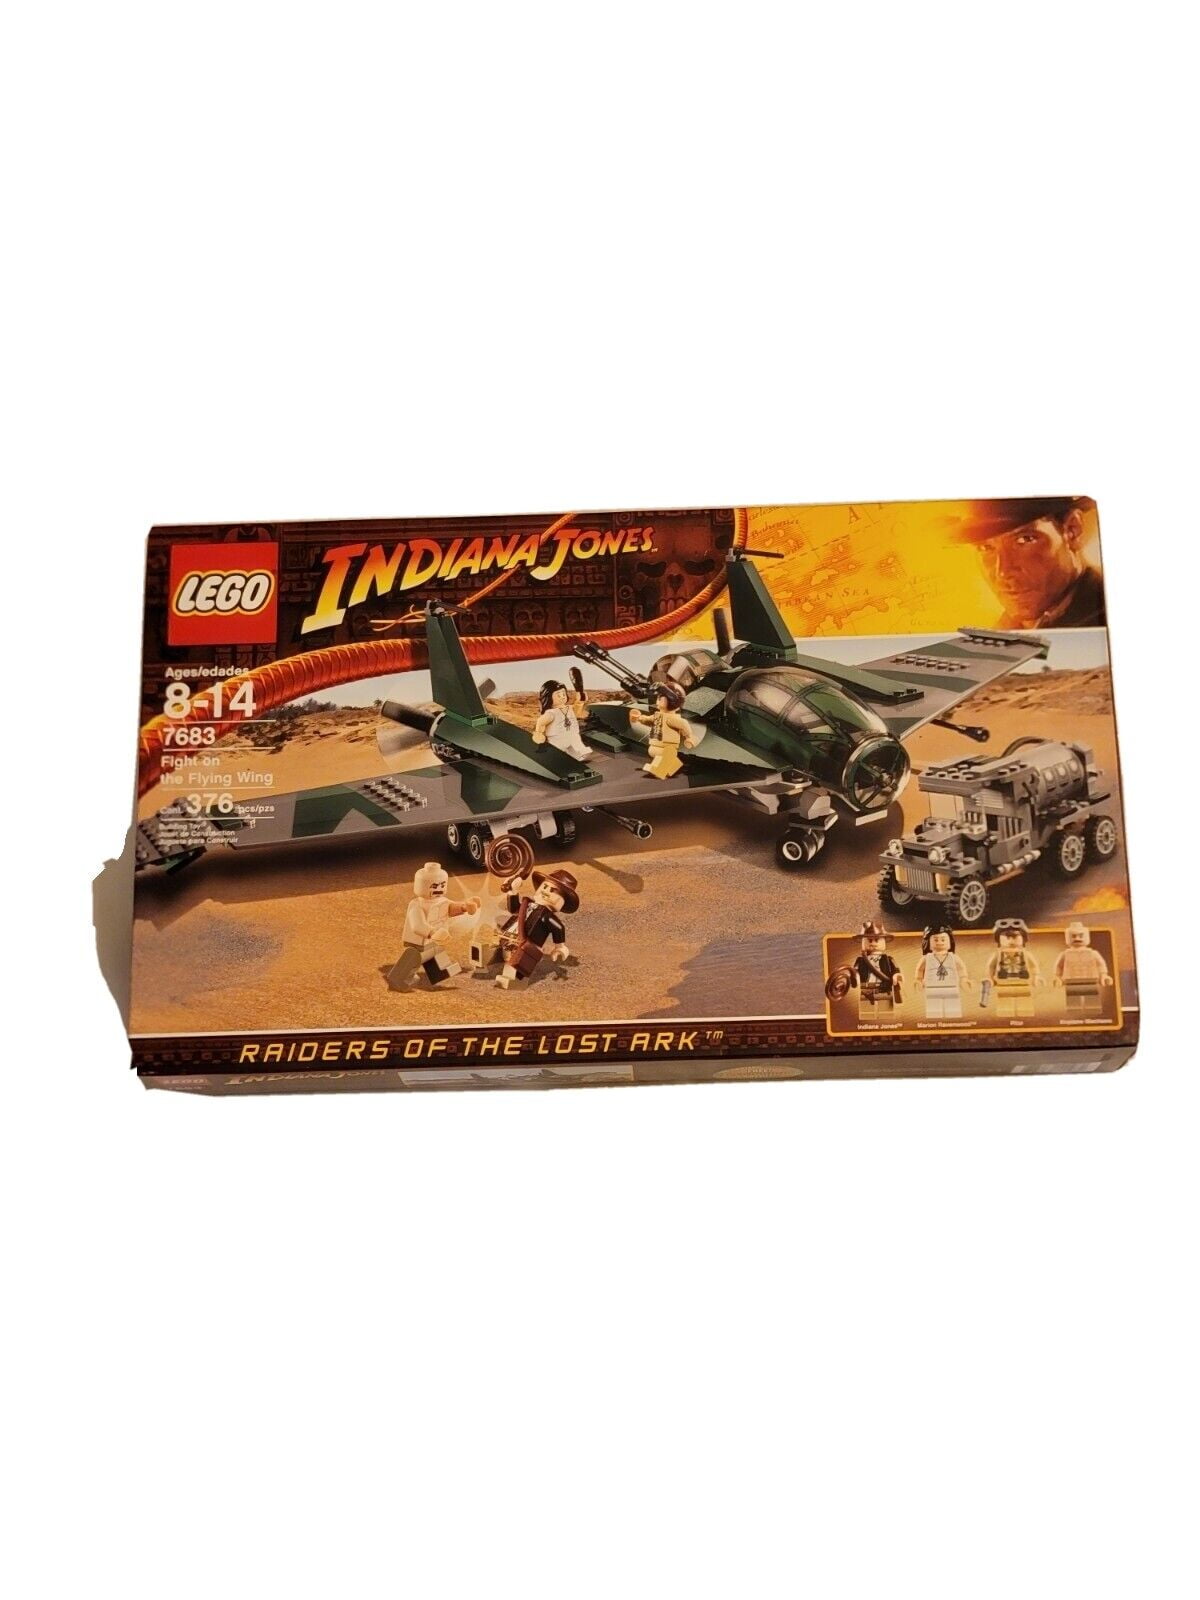 NEW Indiana Jones 7683 On The Flying Wing MISB Sealed - Walmart.com